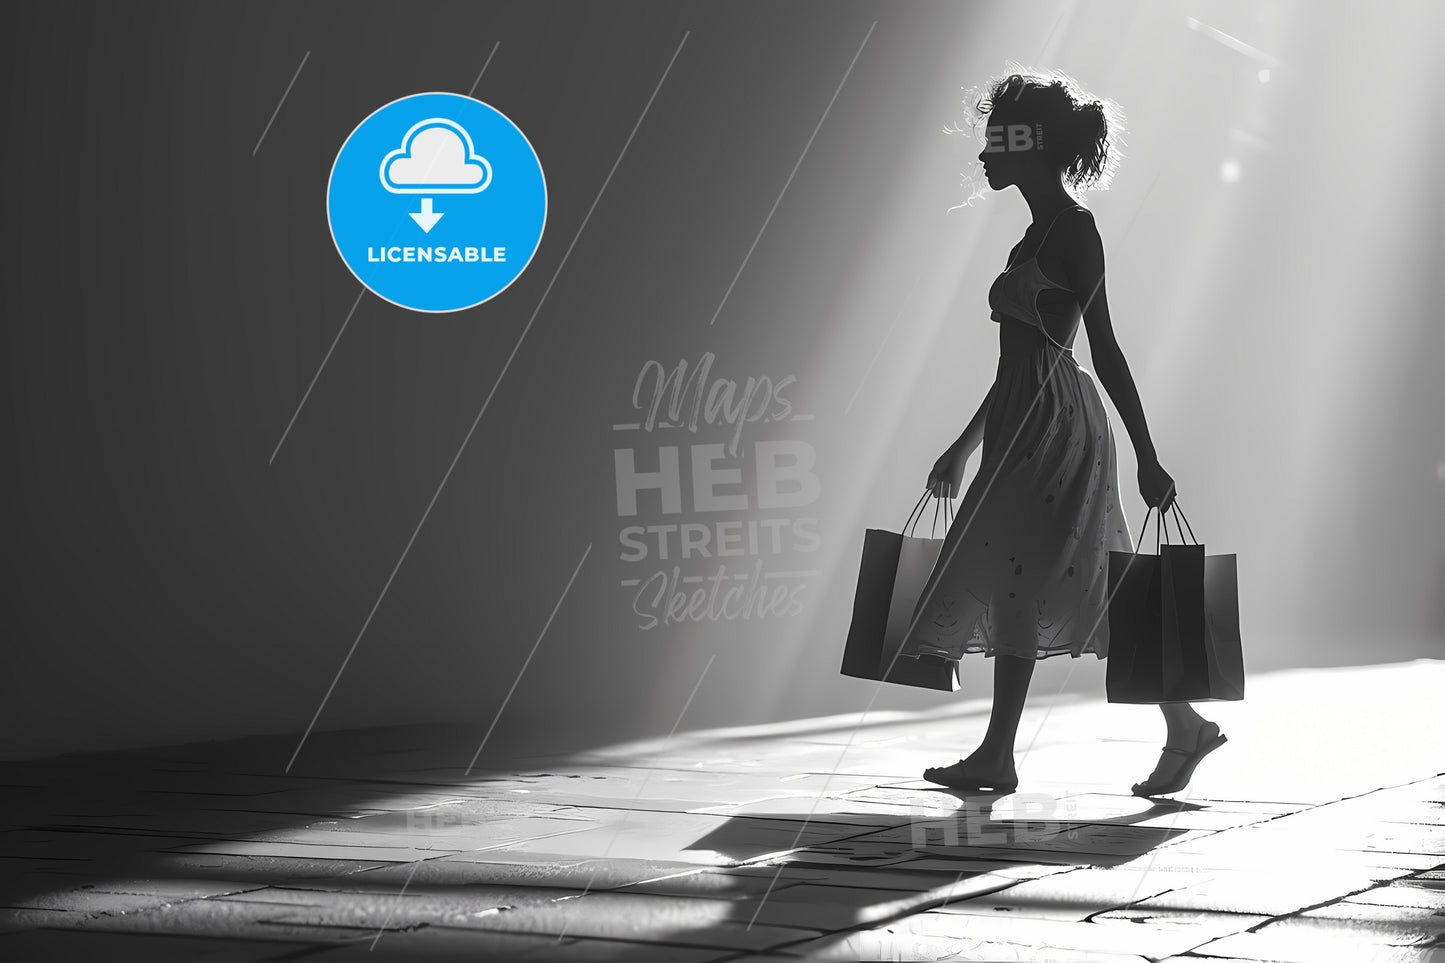 A Grayscale Illustration Of A Hedonist, A Woman Walking With Shopping Bags